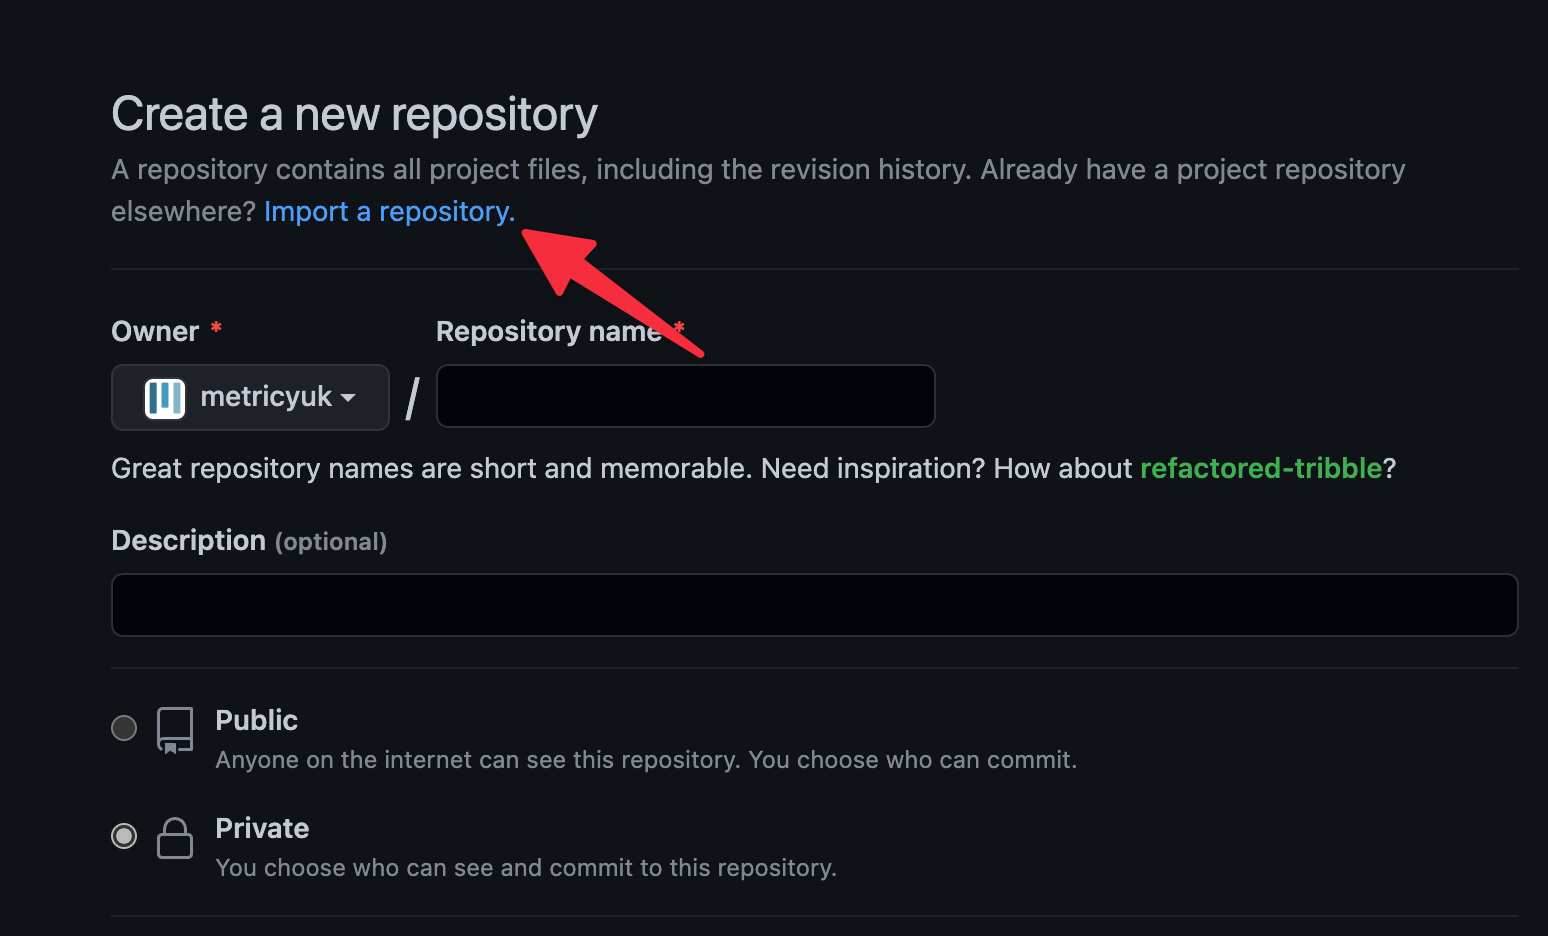 just under the create a new repository header is a link to import a repository